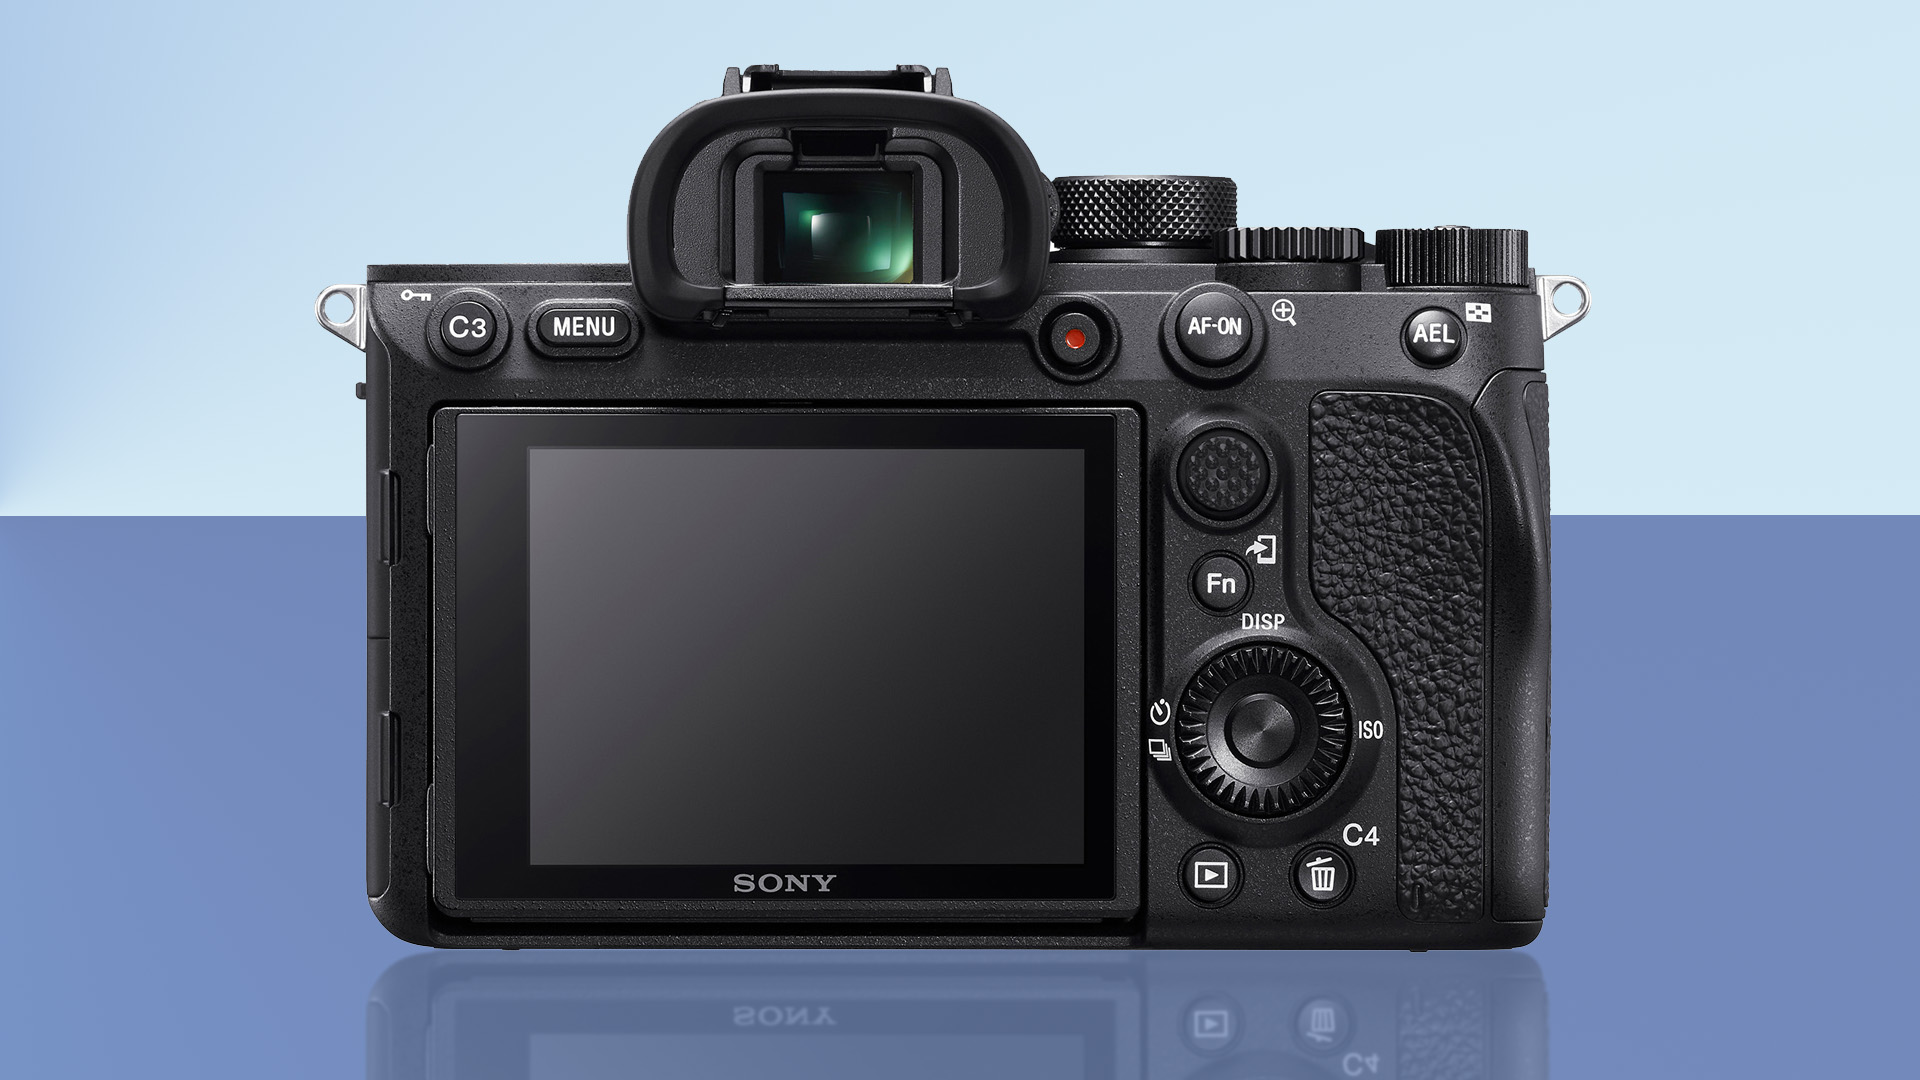 The back of the Sony A7R IV camera on a blue background